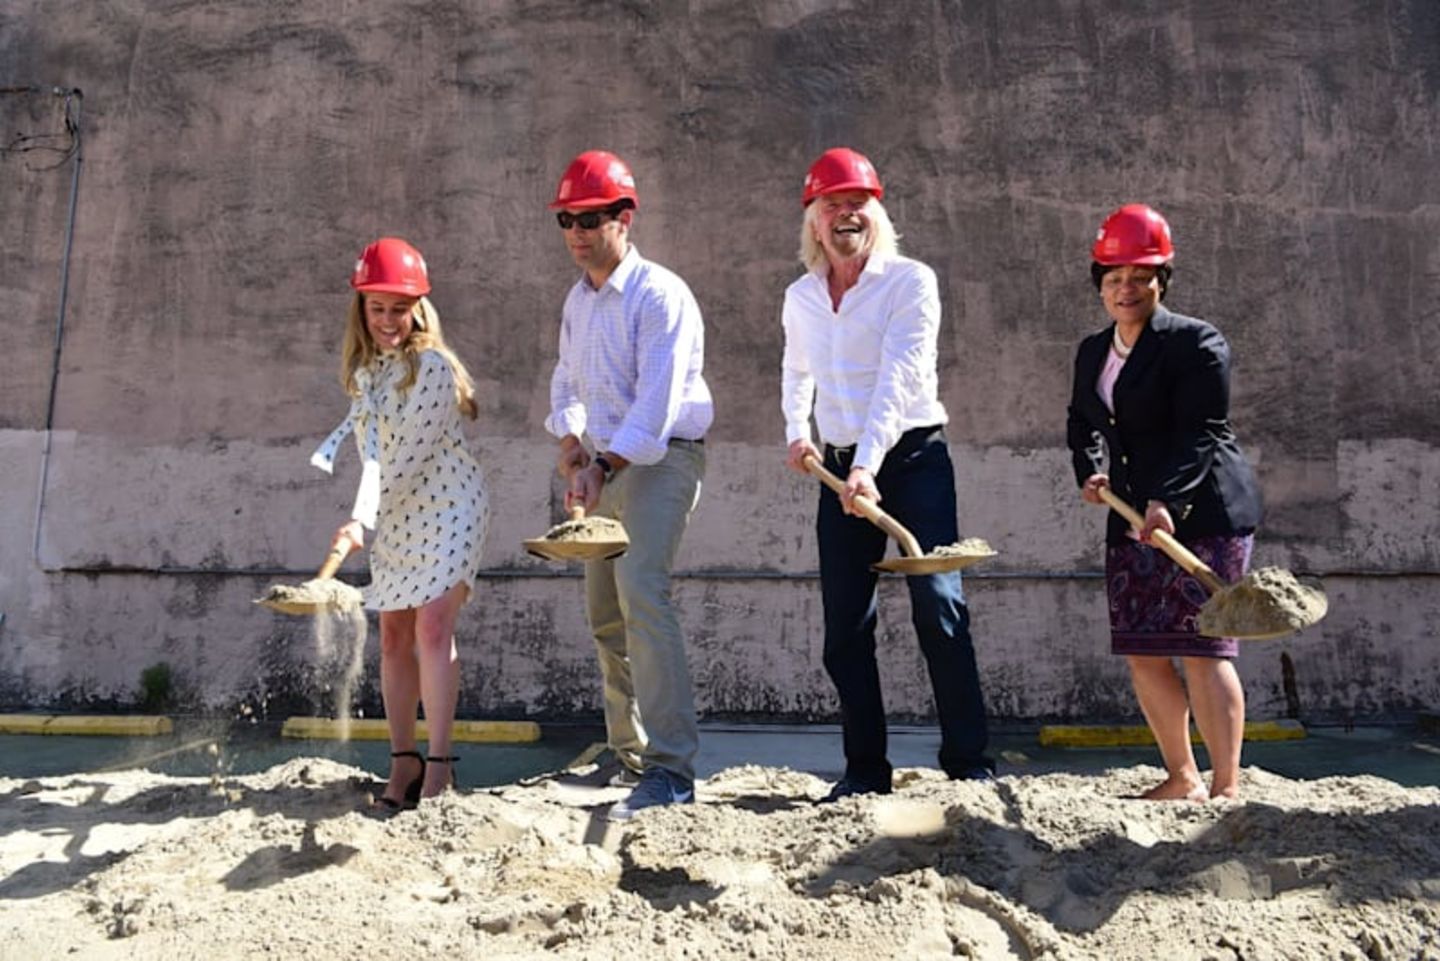 Richard Branson breaking ground of the virgin hotels site in new orleans in 2019